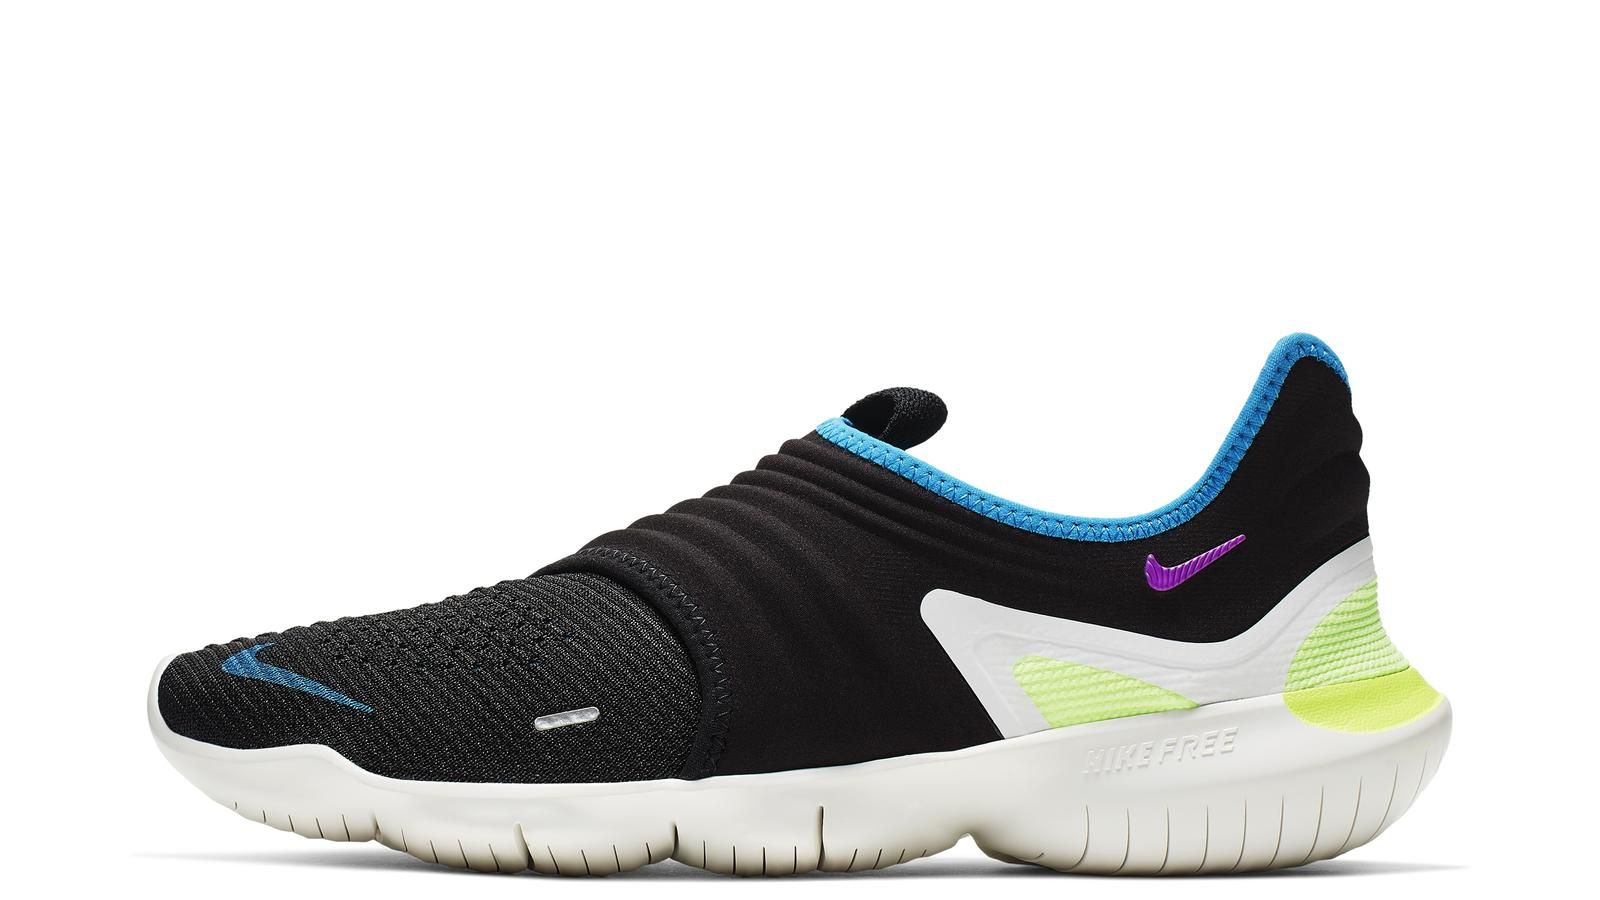 Noisy Station disloyalty Nike launch new Free RN 5.0 and 3.0 running shoes